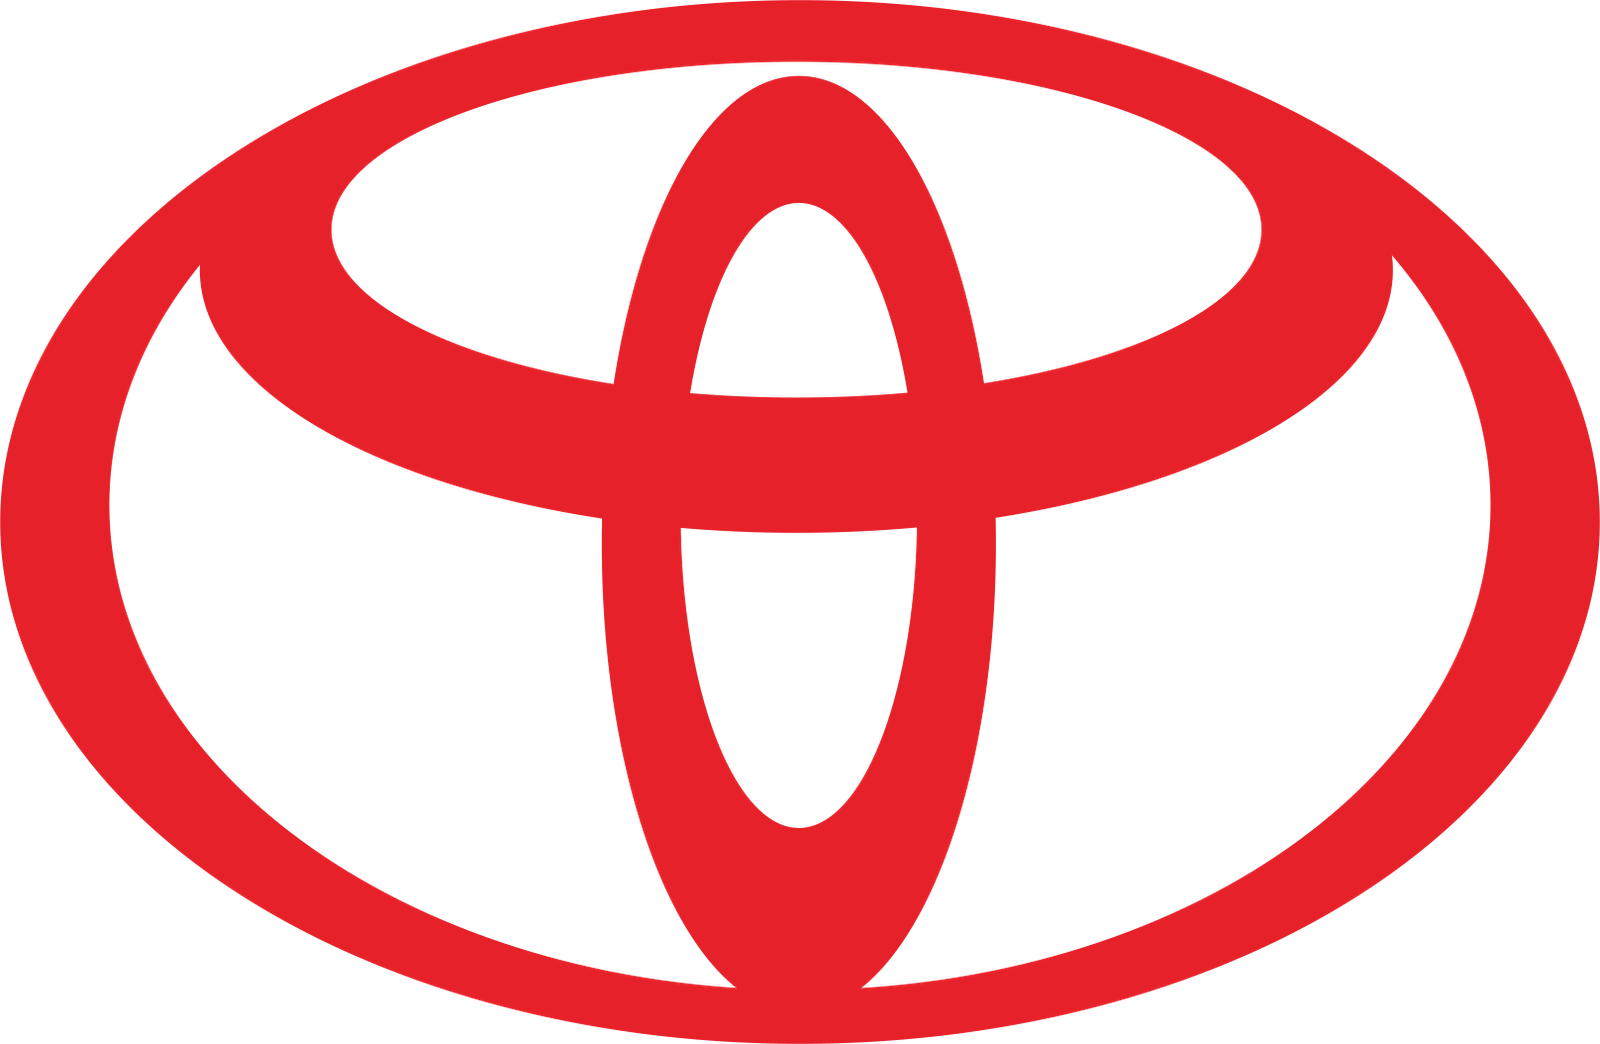 Toyota Logo Vector PNG - 31747